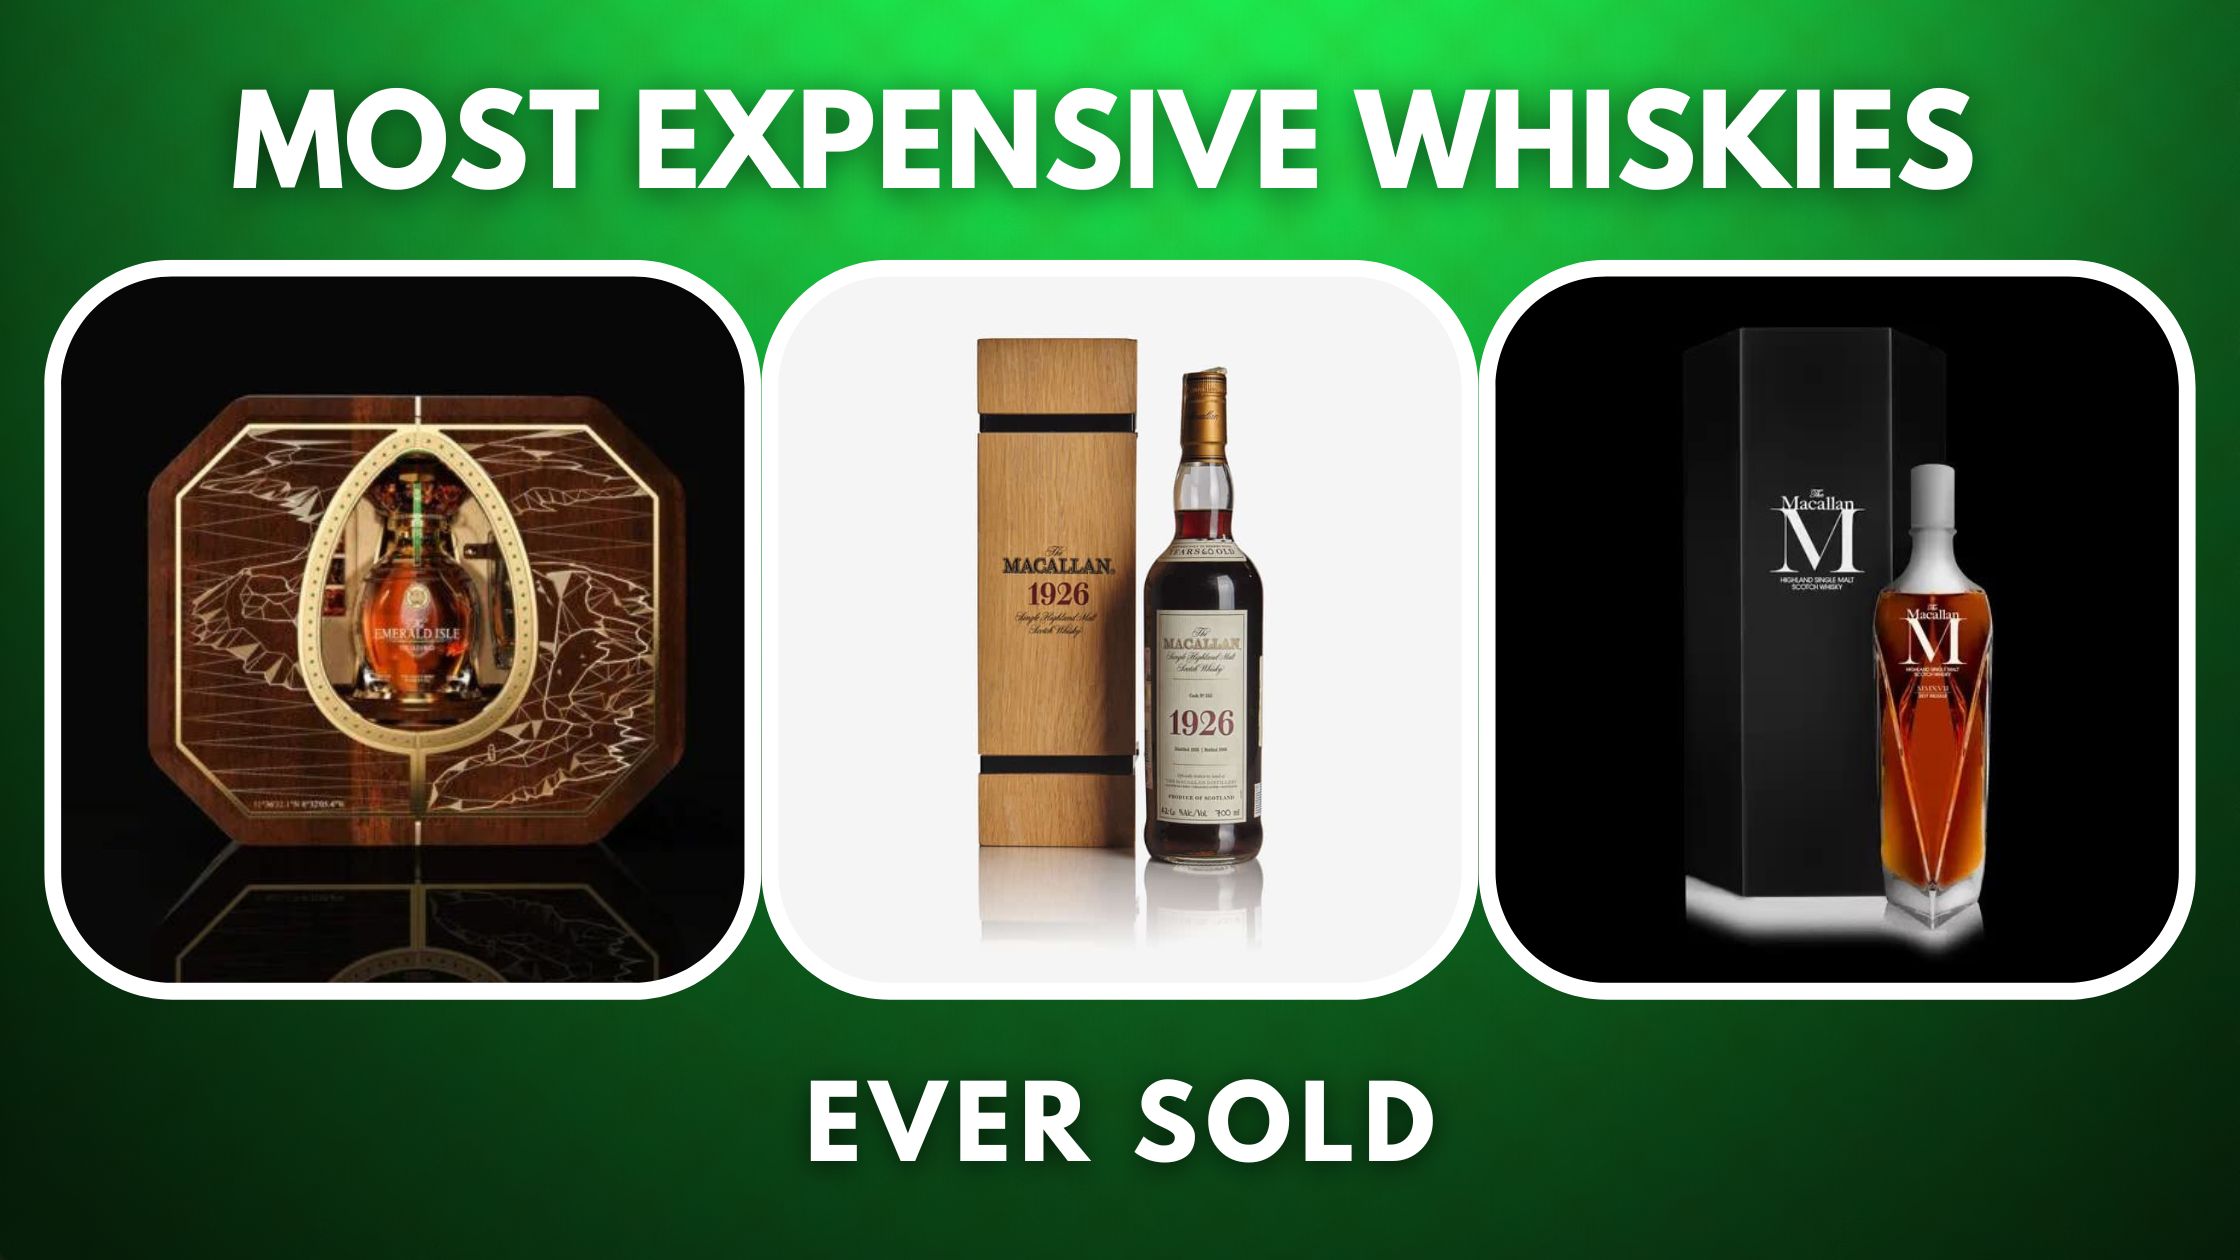 The Most Expensive Whisky Ever Sold At Auction, 56% OFF